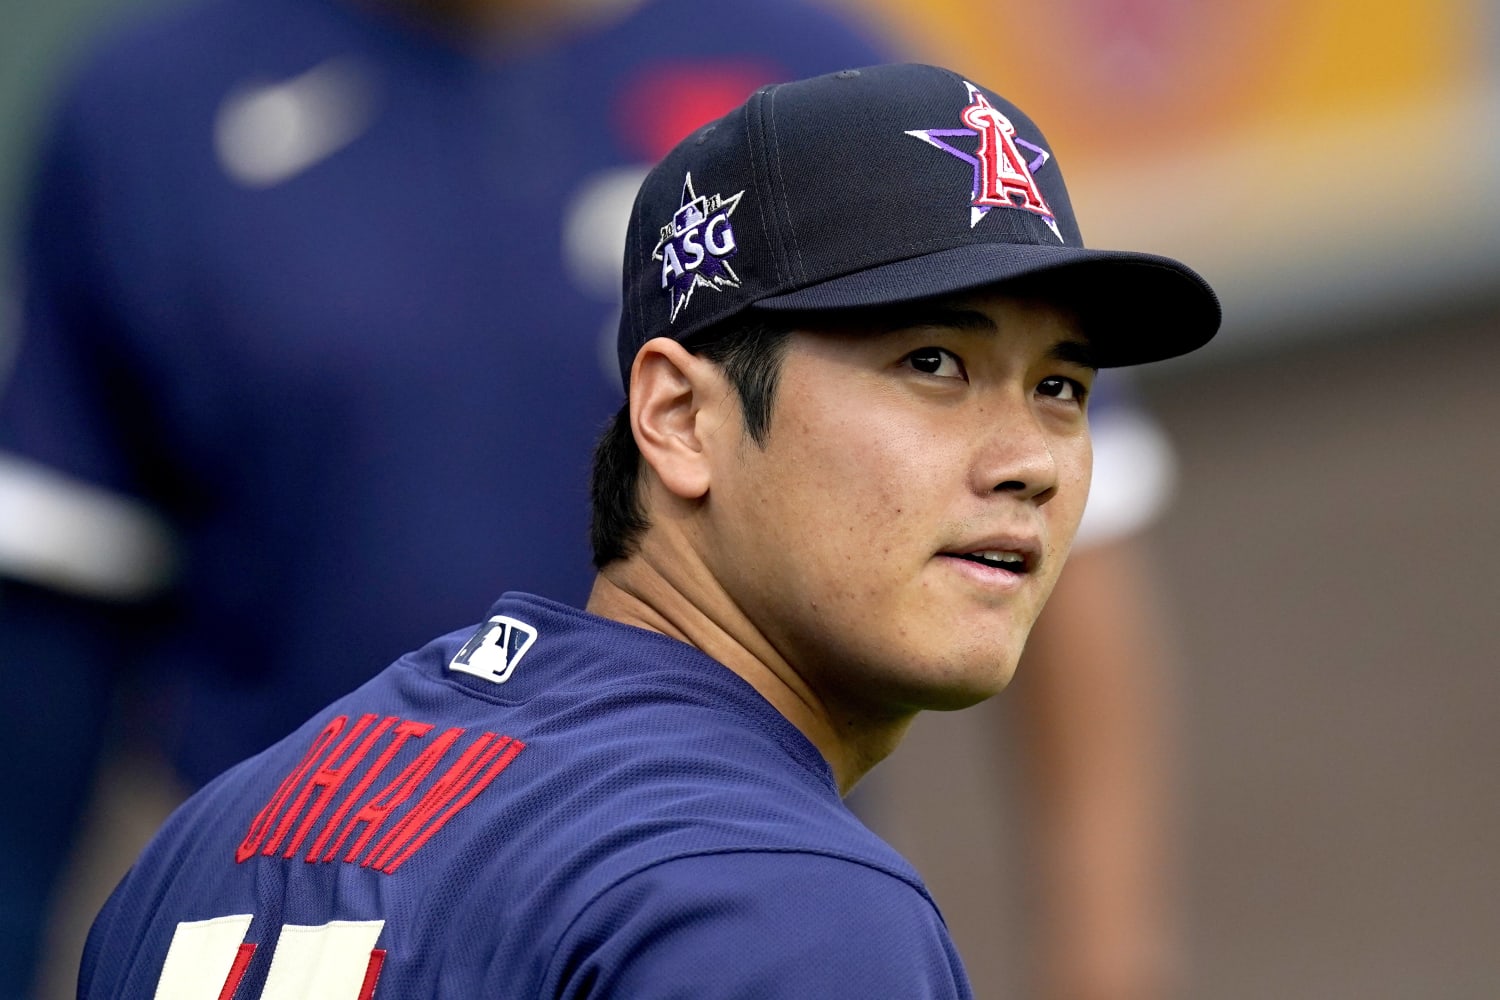 Shohei Ohtani Is Just the Star America's Pastime Needs - The New York Times